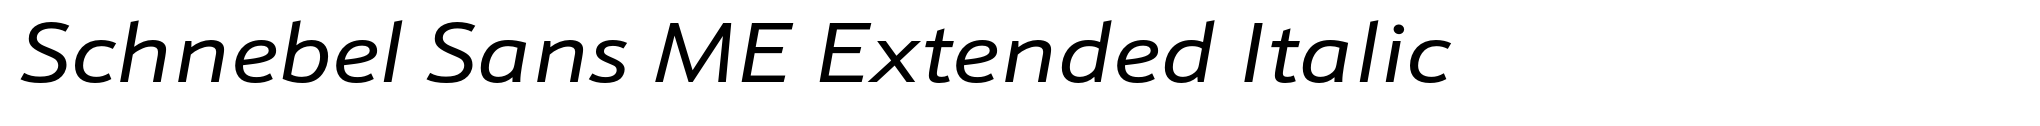 Schnebel Sans ME Extended Italic image